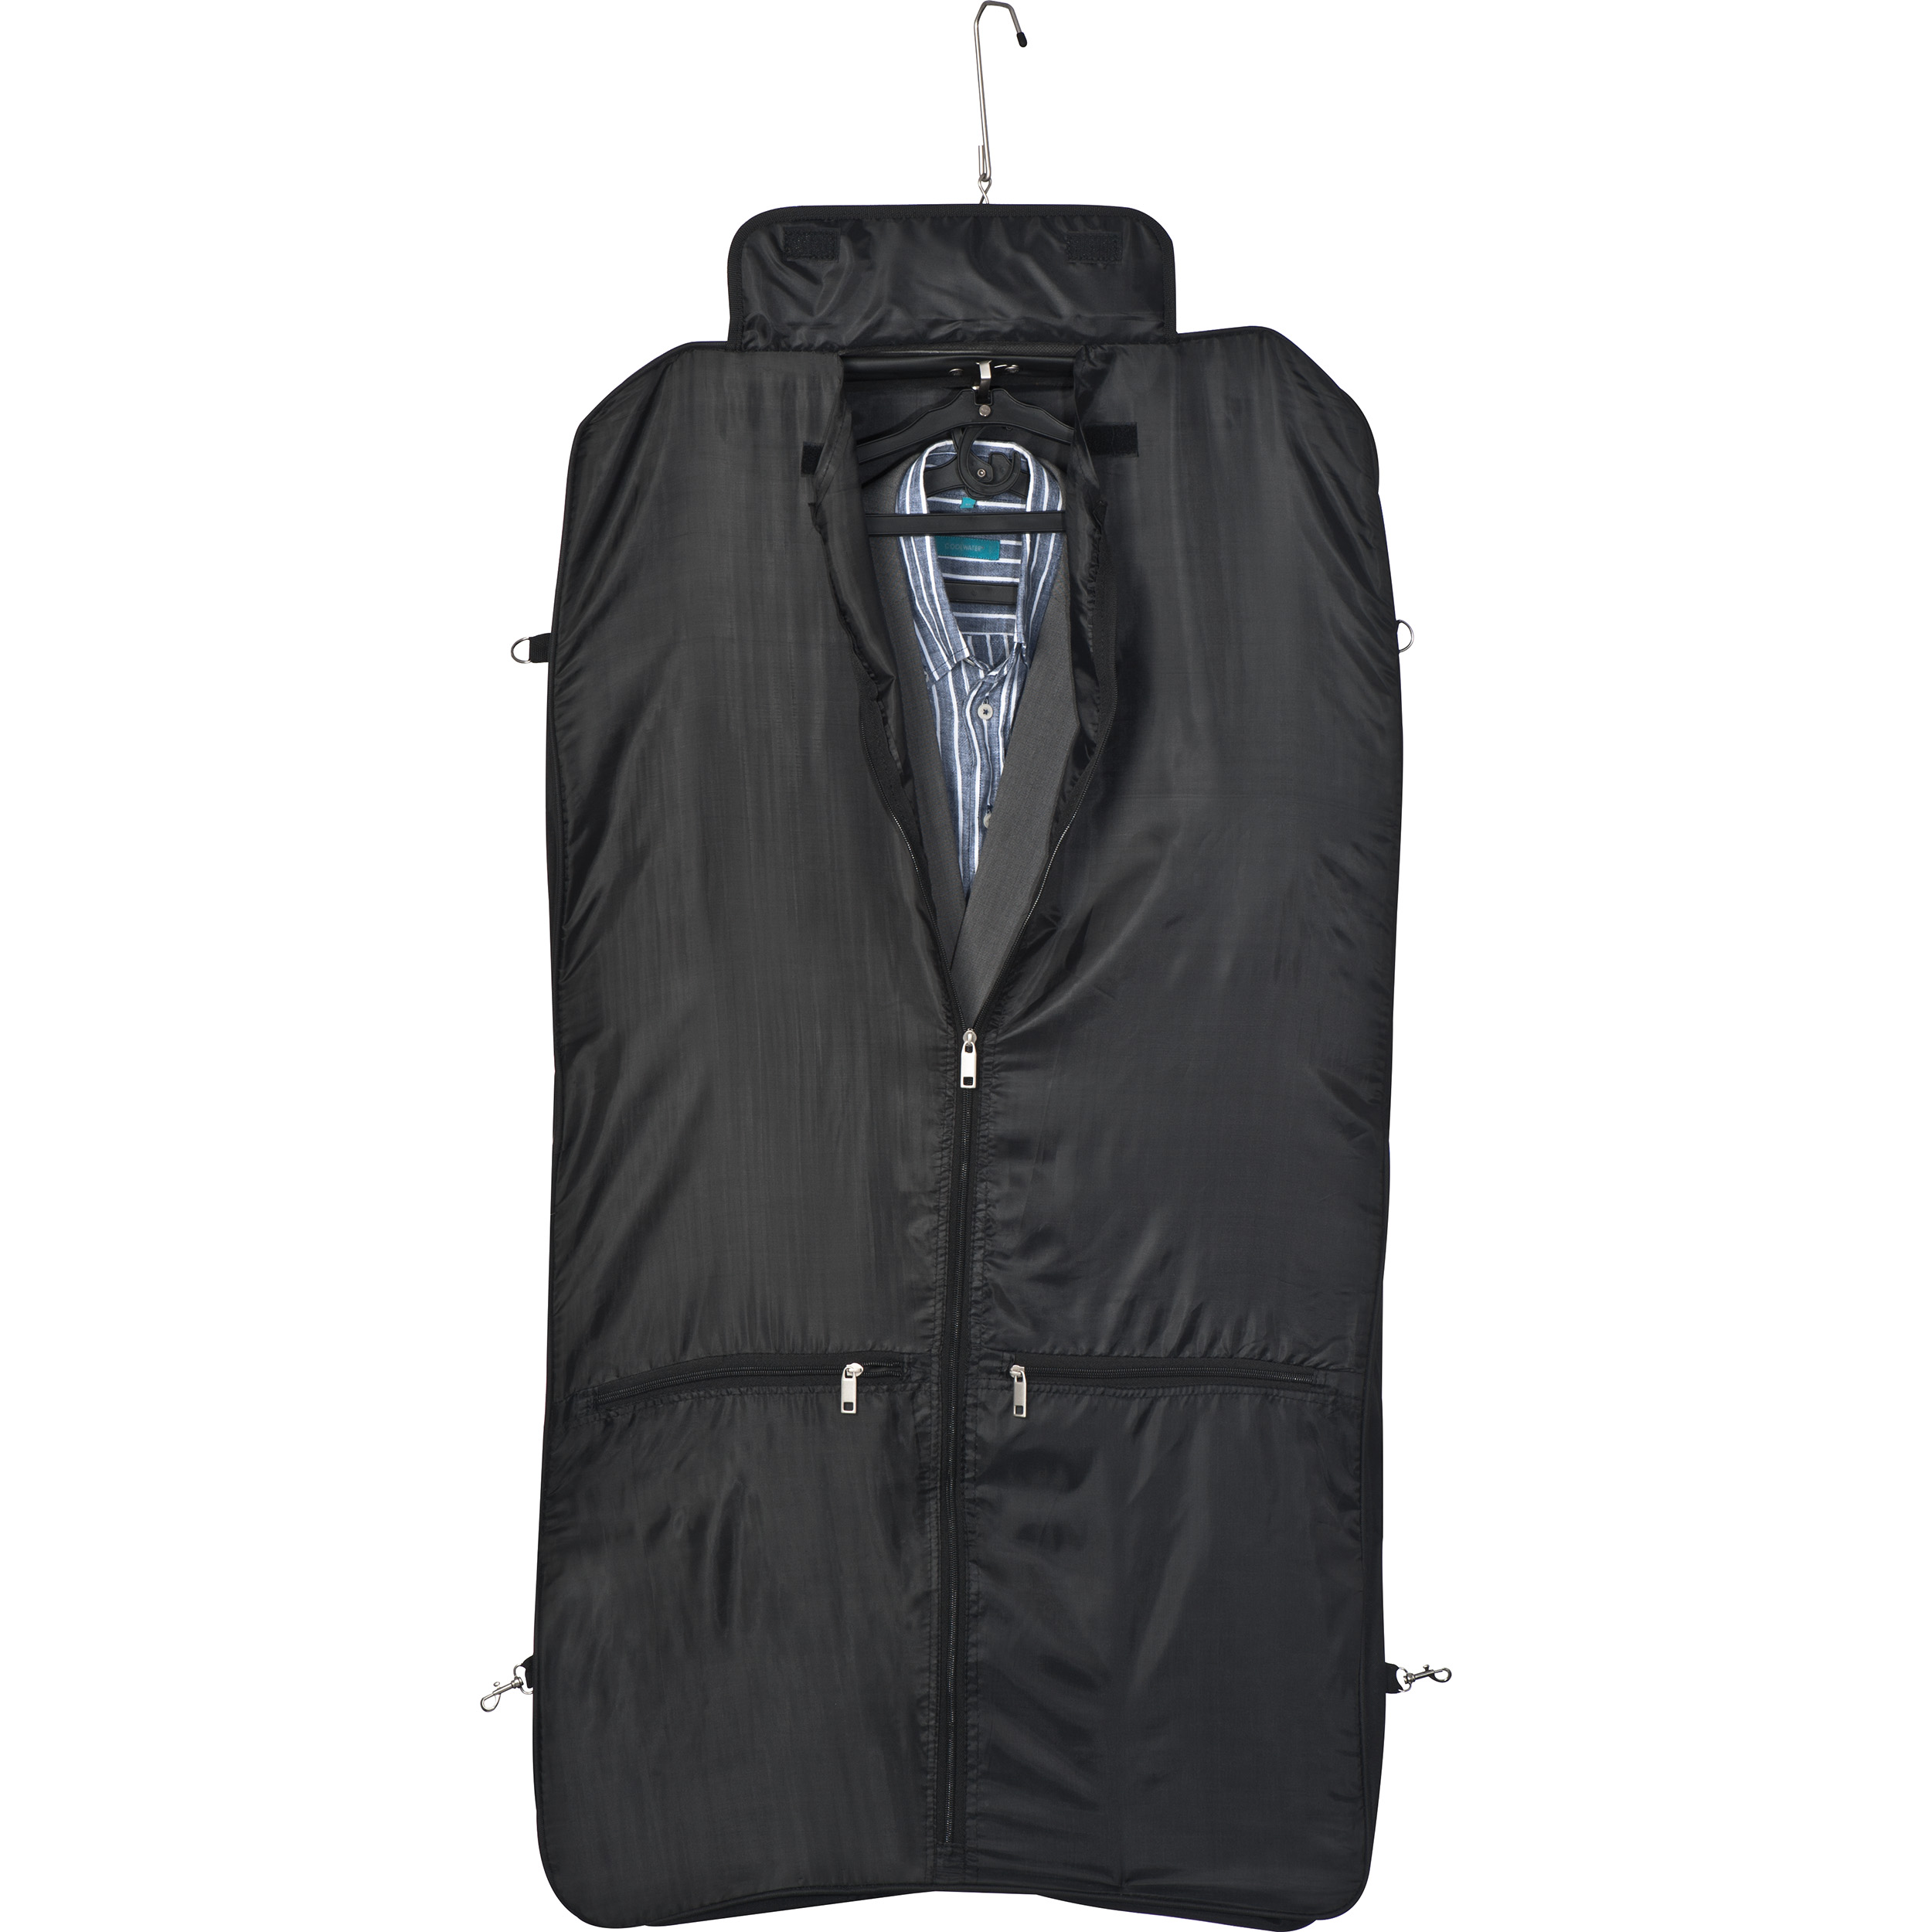 Polyester suit carrier